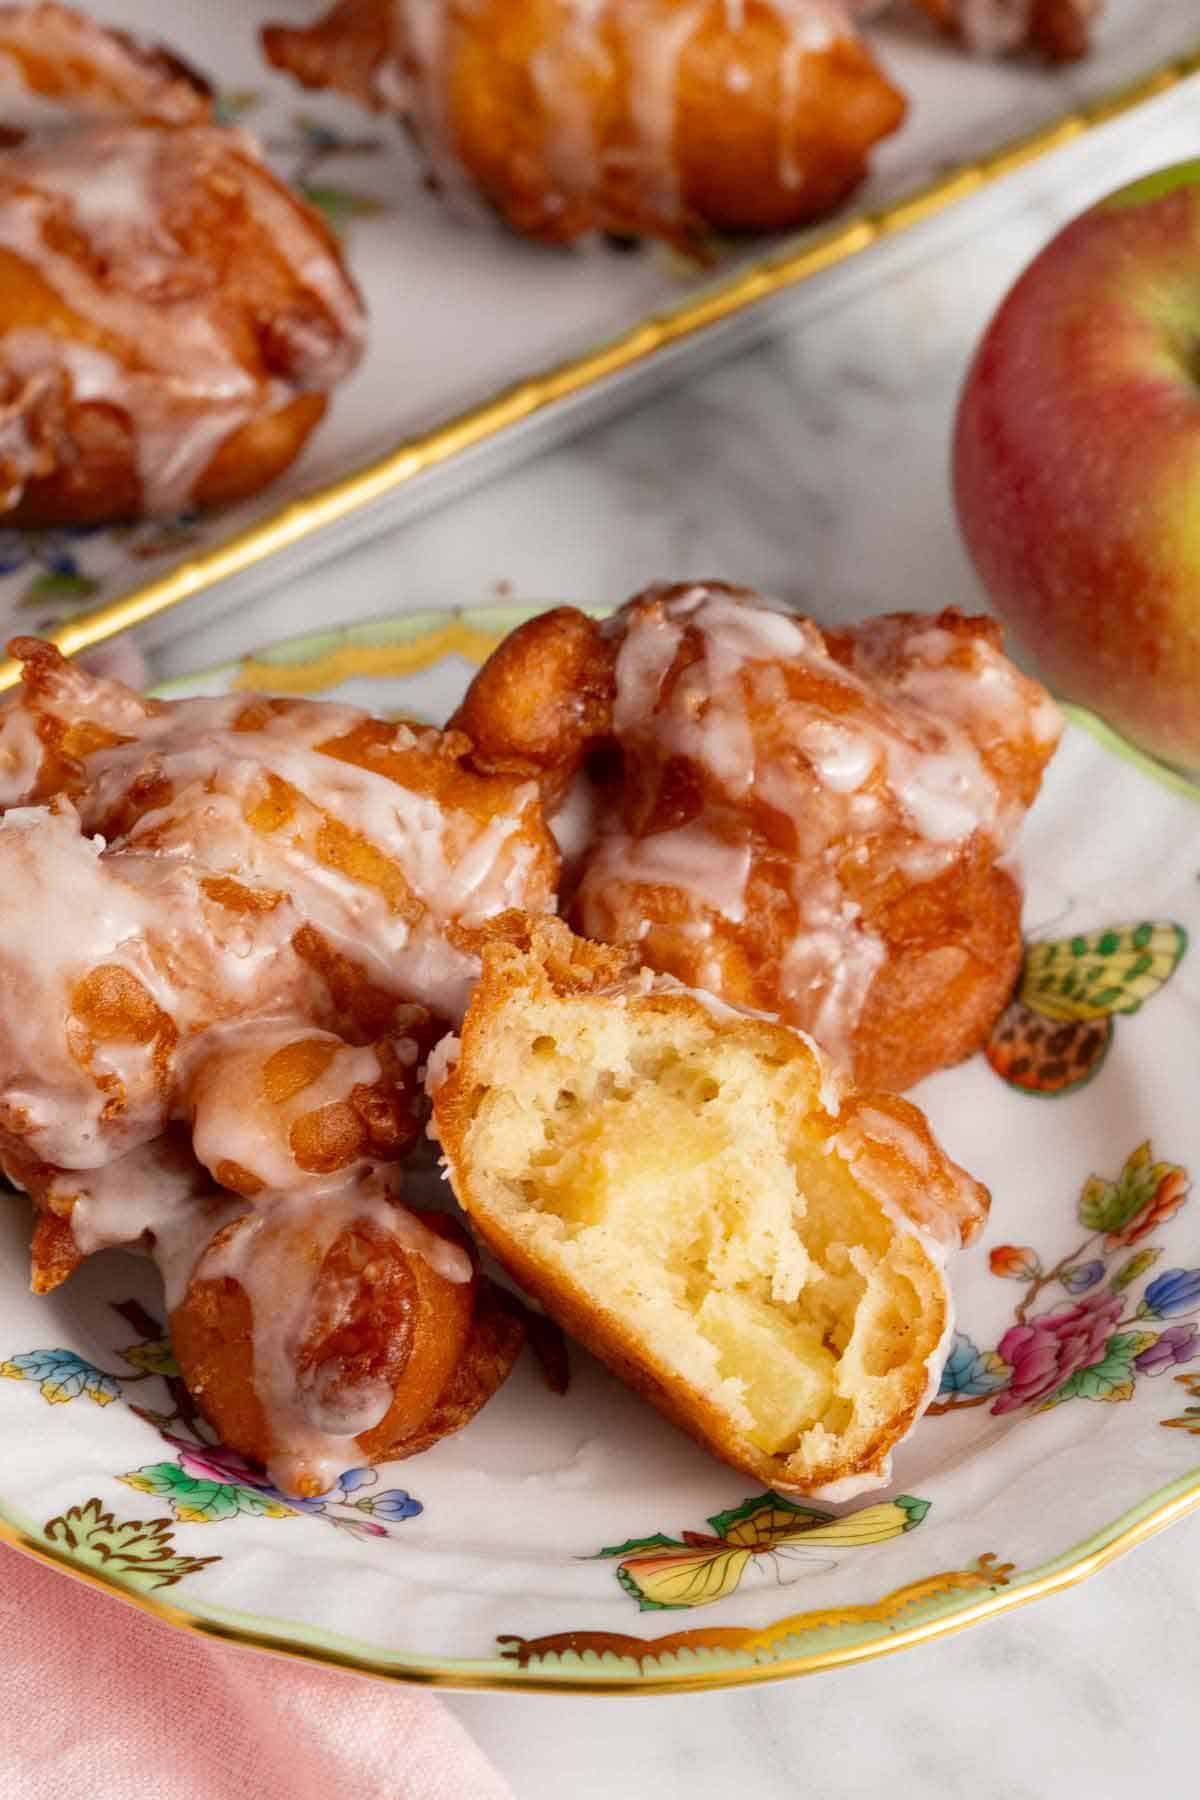 A plate of apple fritters with one cut open, showing the interior.